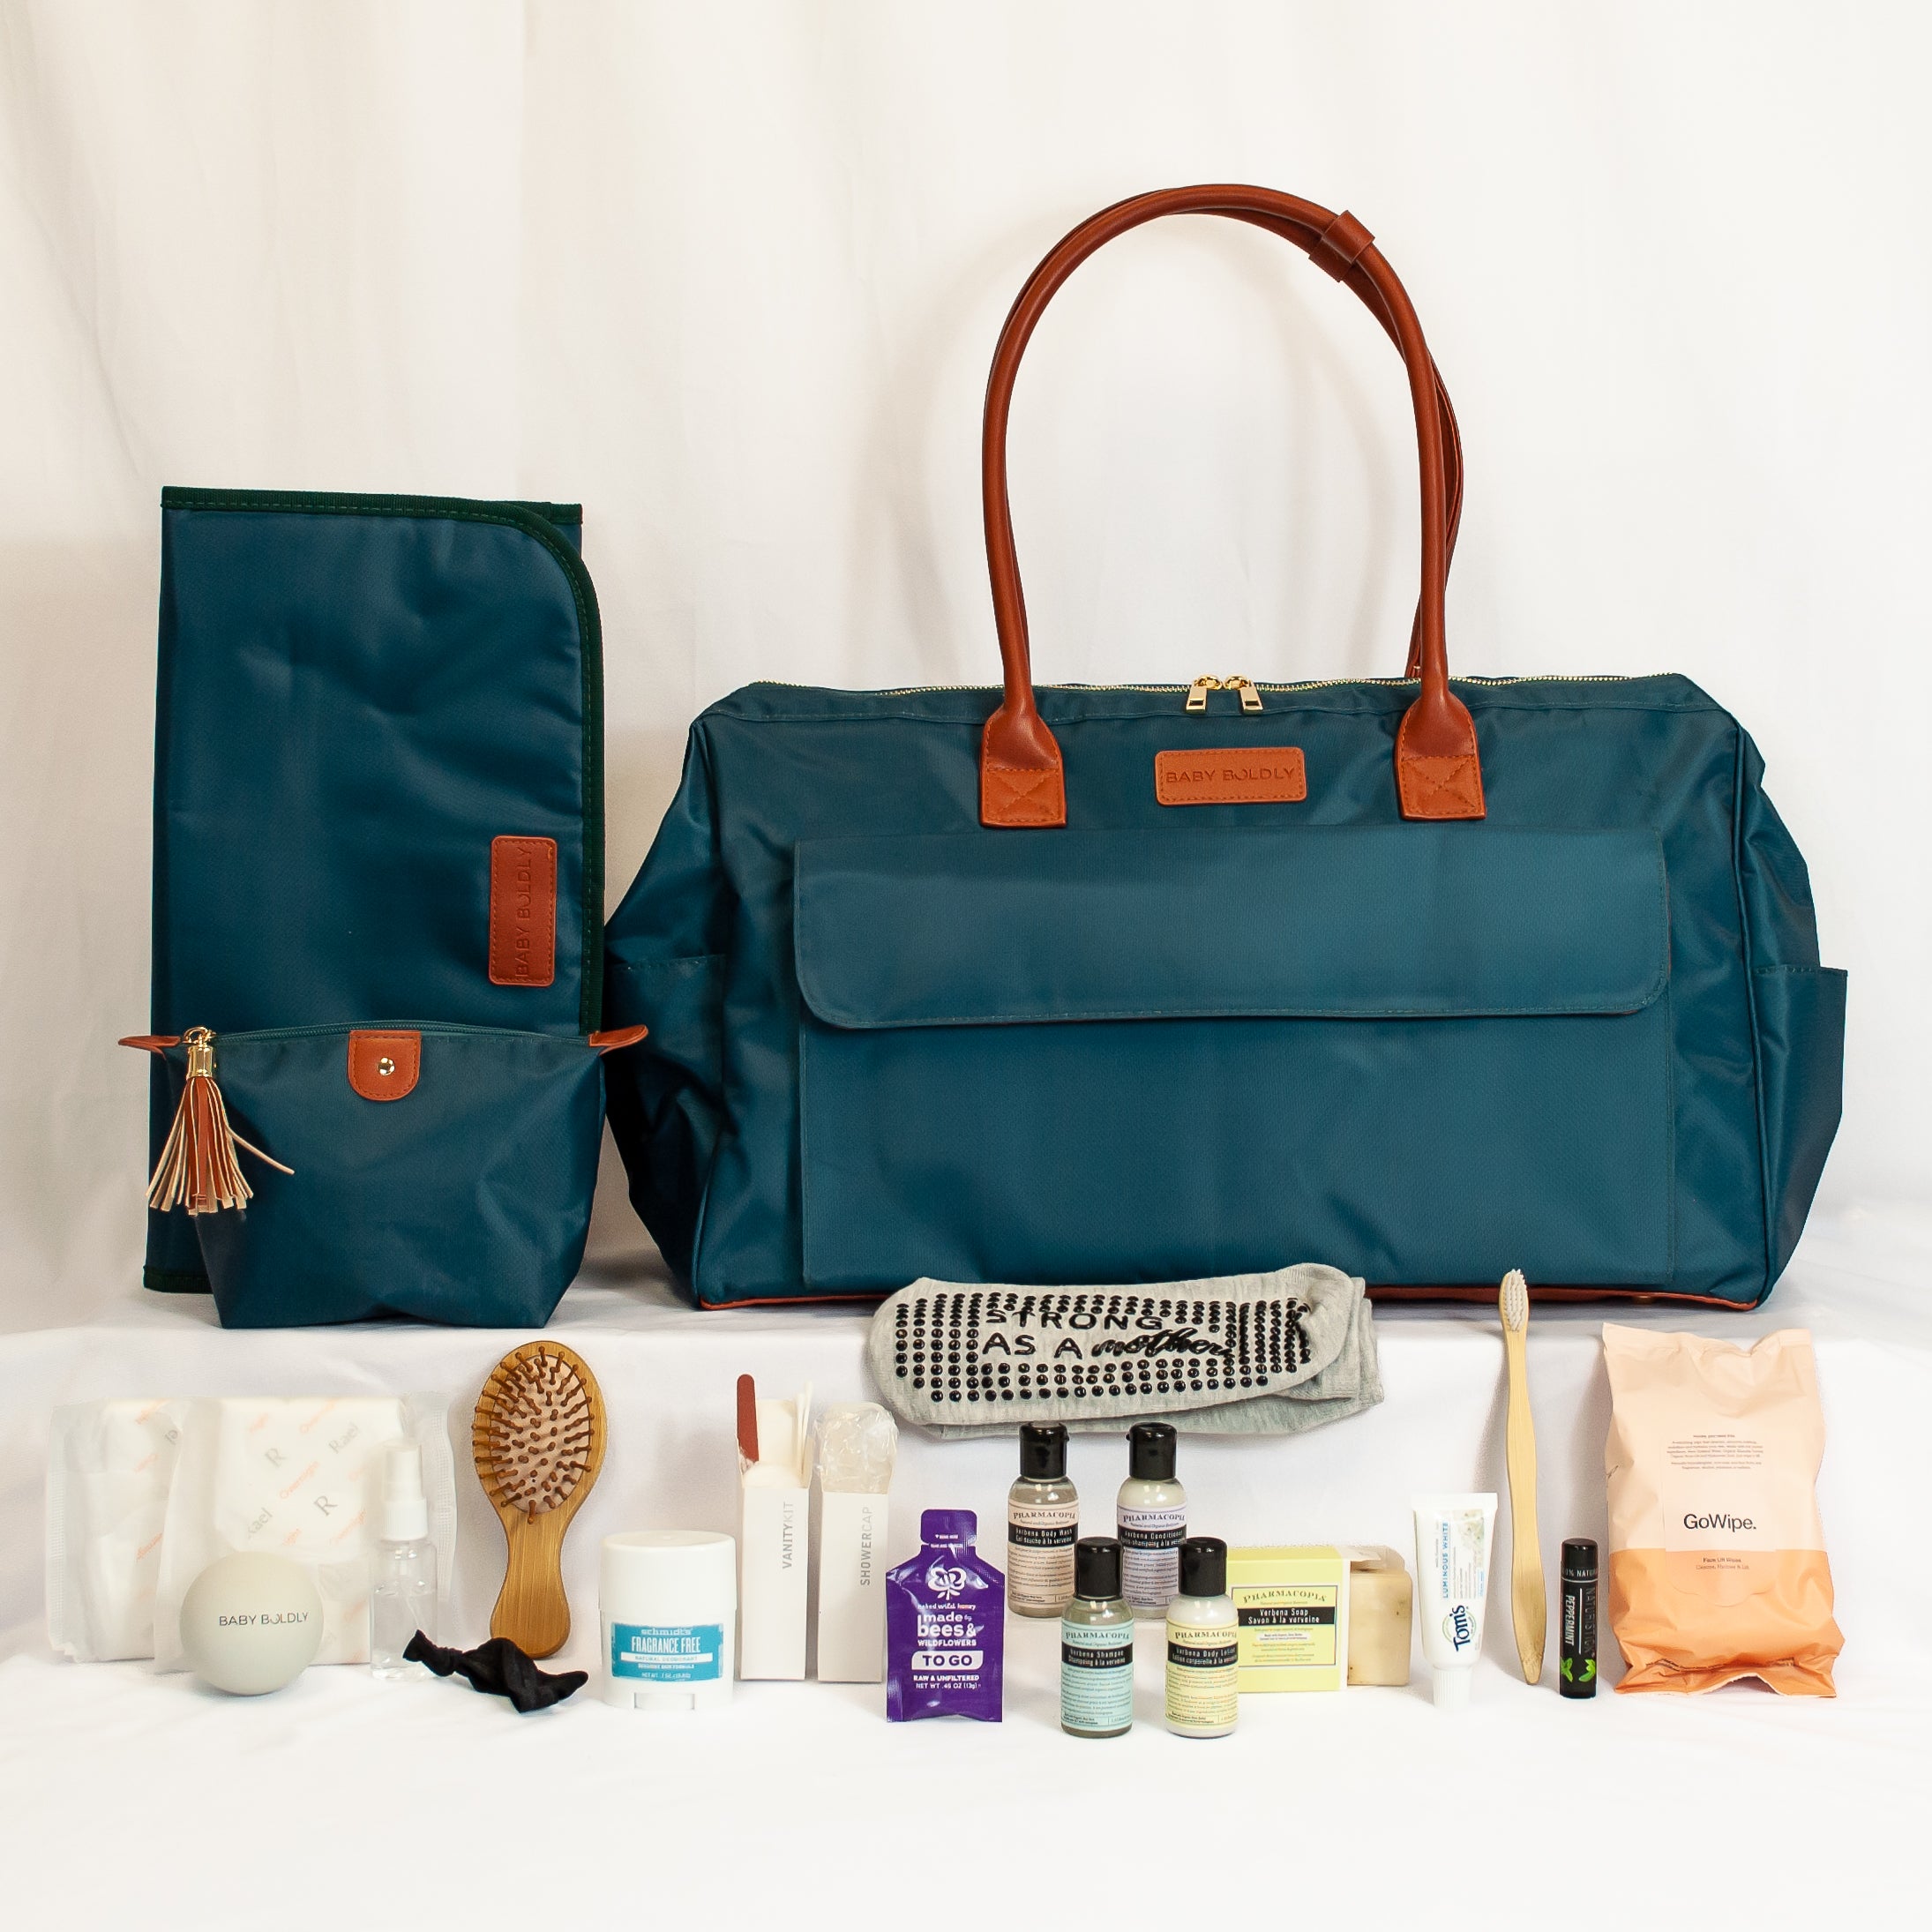 Pre-packed Birth Bag: 